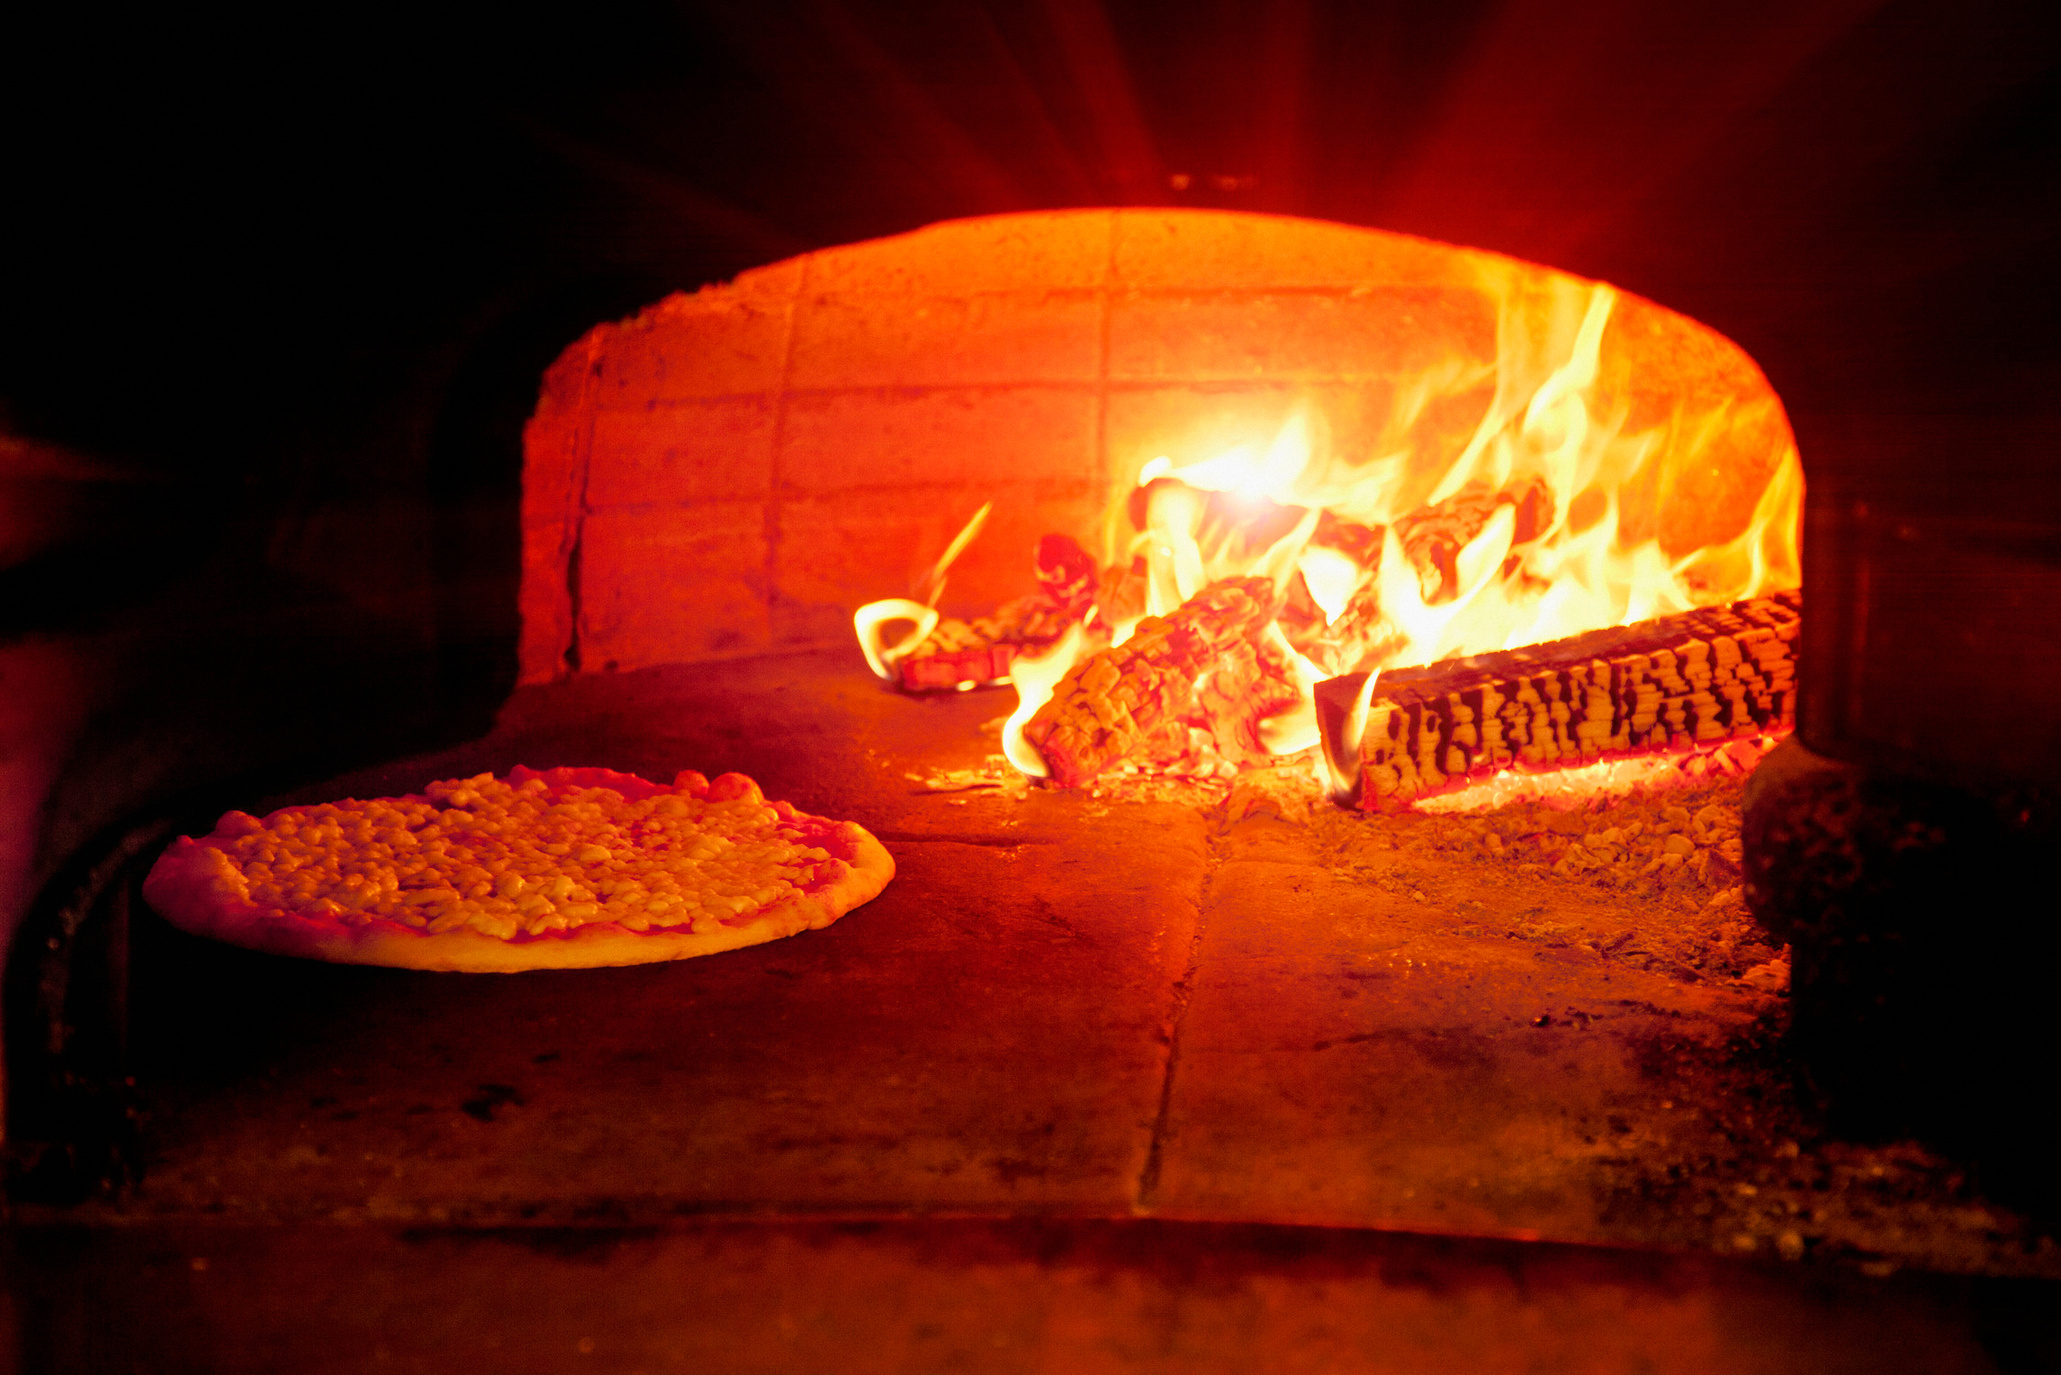 "Pizza baking in wood burning oven